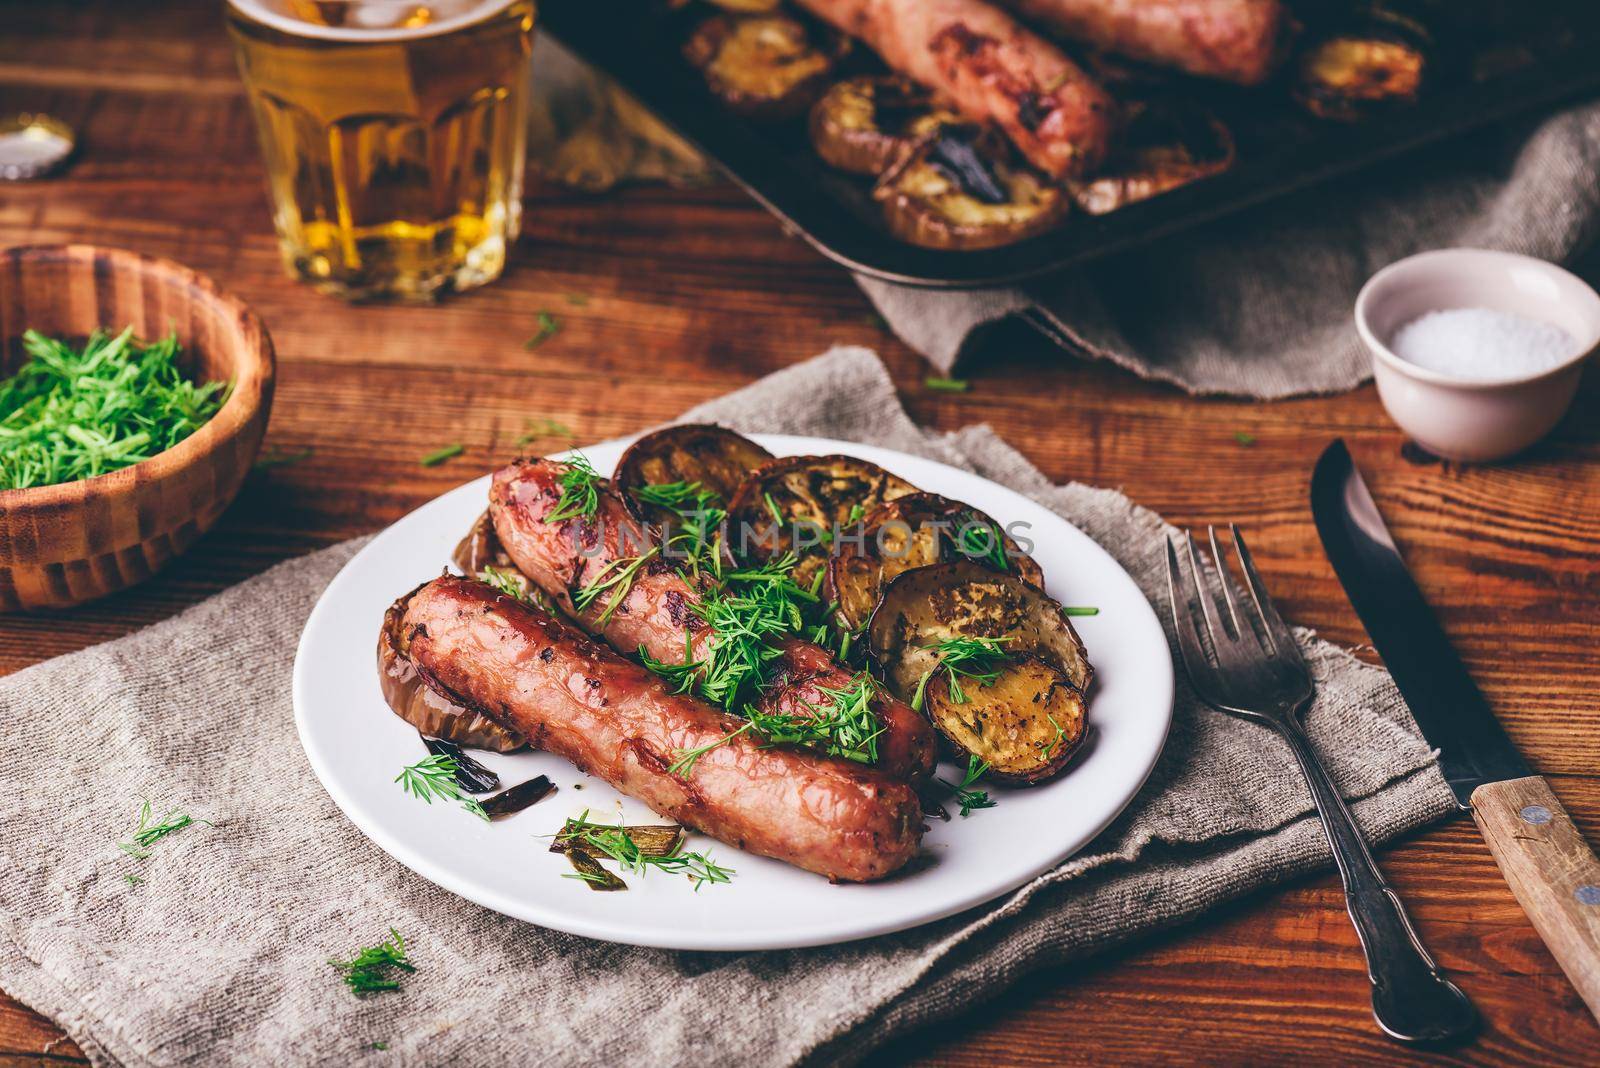 Pork Sausages Baked with Eggplant and Herbs on White Plate Garnished with Dill